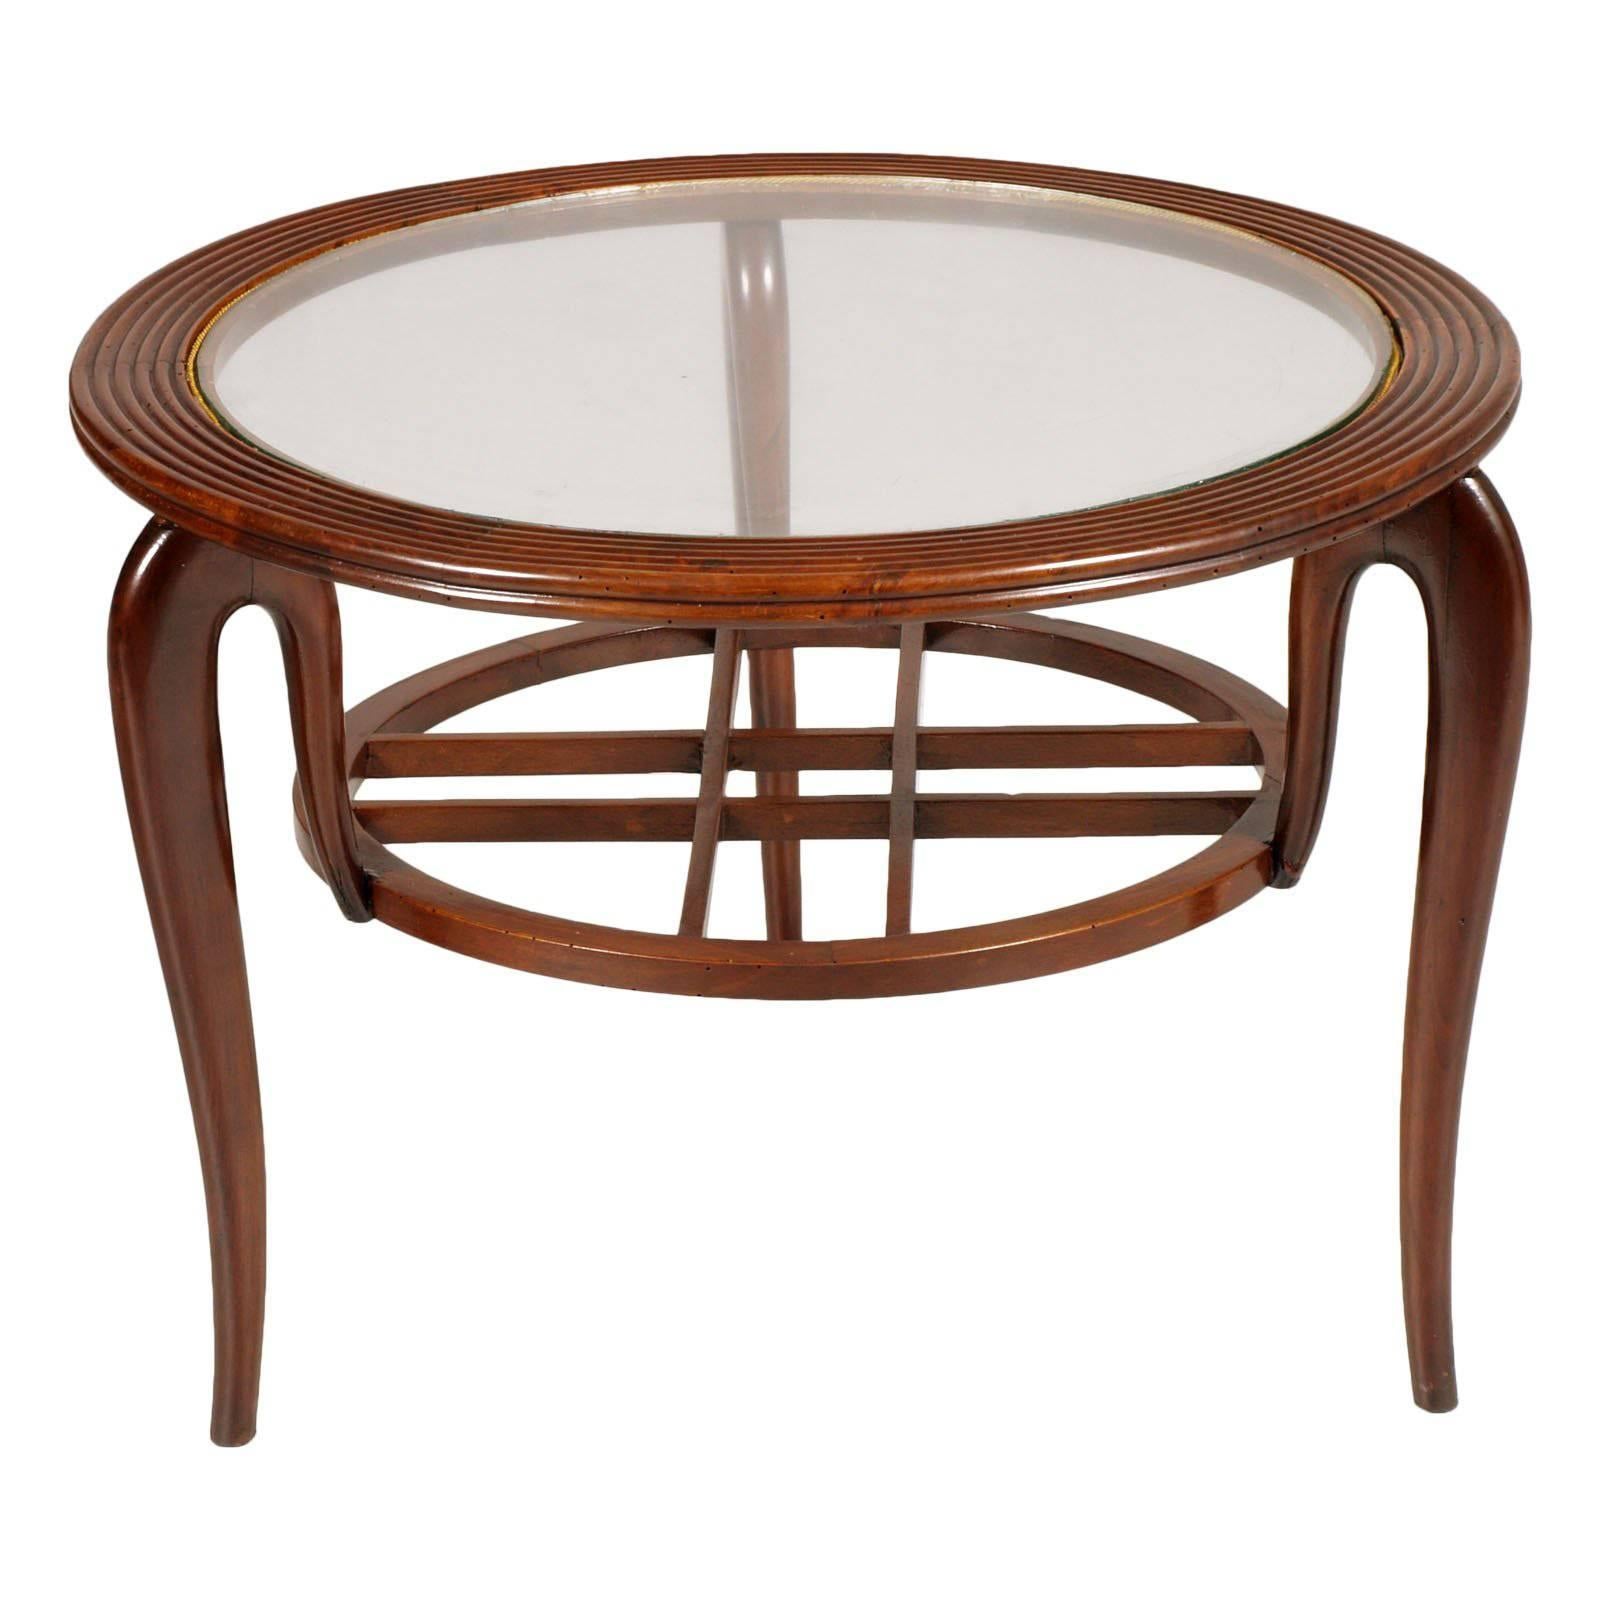 1940s Mid-Century Coffee Table Centre Table by Paolo Buffa, Walnut wax-polished